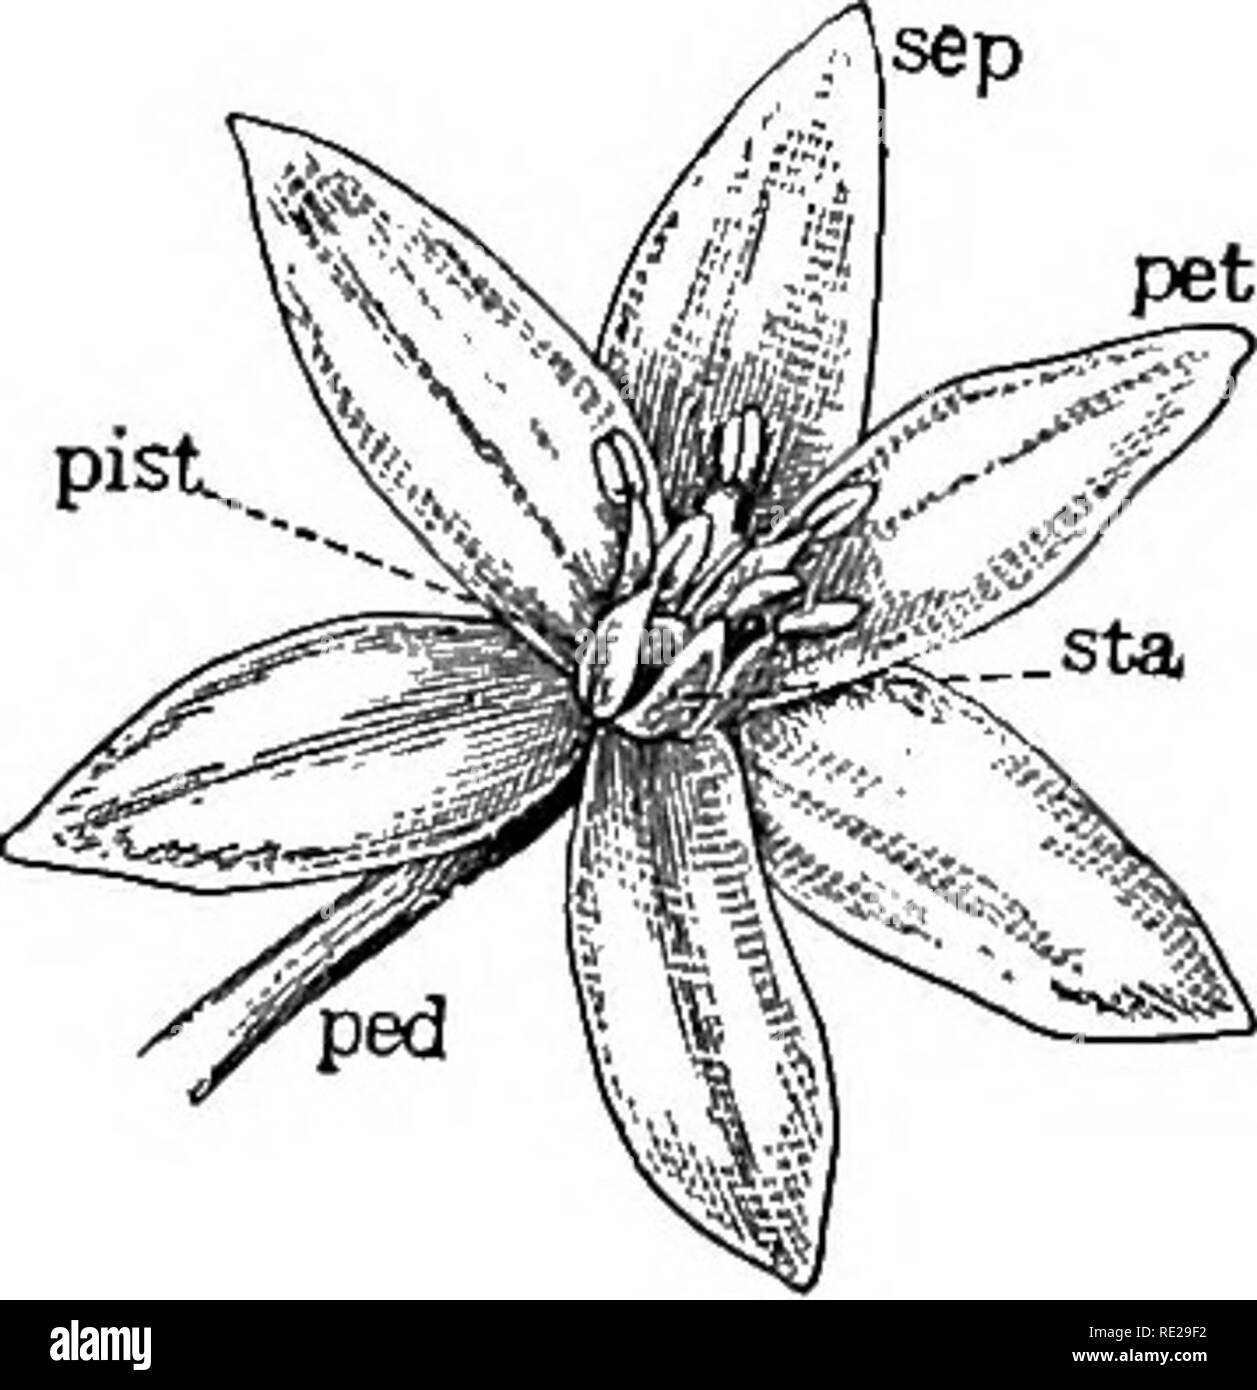 . Botany all the year round; a practical text-book for schools. Botany. VIII. THE FLOWER HYPOGYNOUS MONOCOTYLEDONS Material.— Any flower of the lily family with disunited petals. Star-of-Bethlehem and yucca are used in the text. Tulip, trillium, dog- tooth violet {Eryihroniimi), spiderwort {Tradescantid), white lily, all make excellent examples. 282. The Floral Envelopes.—Make a sketch of a flower of the Star-of-Bethlehem, or other of the Hly tribe, from the outside. Label the head of the peduncle that sup- ports the flower, receptacle, or torus, the three outer greenish leaves, sepals, the th Stock Photo